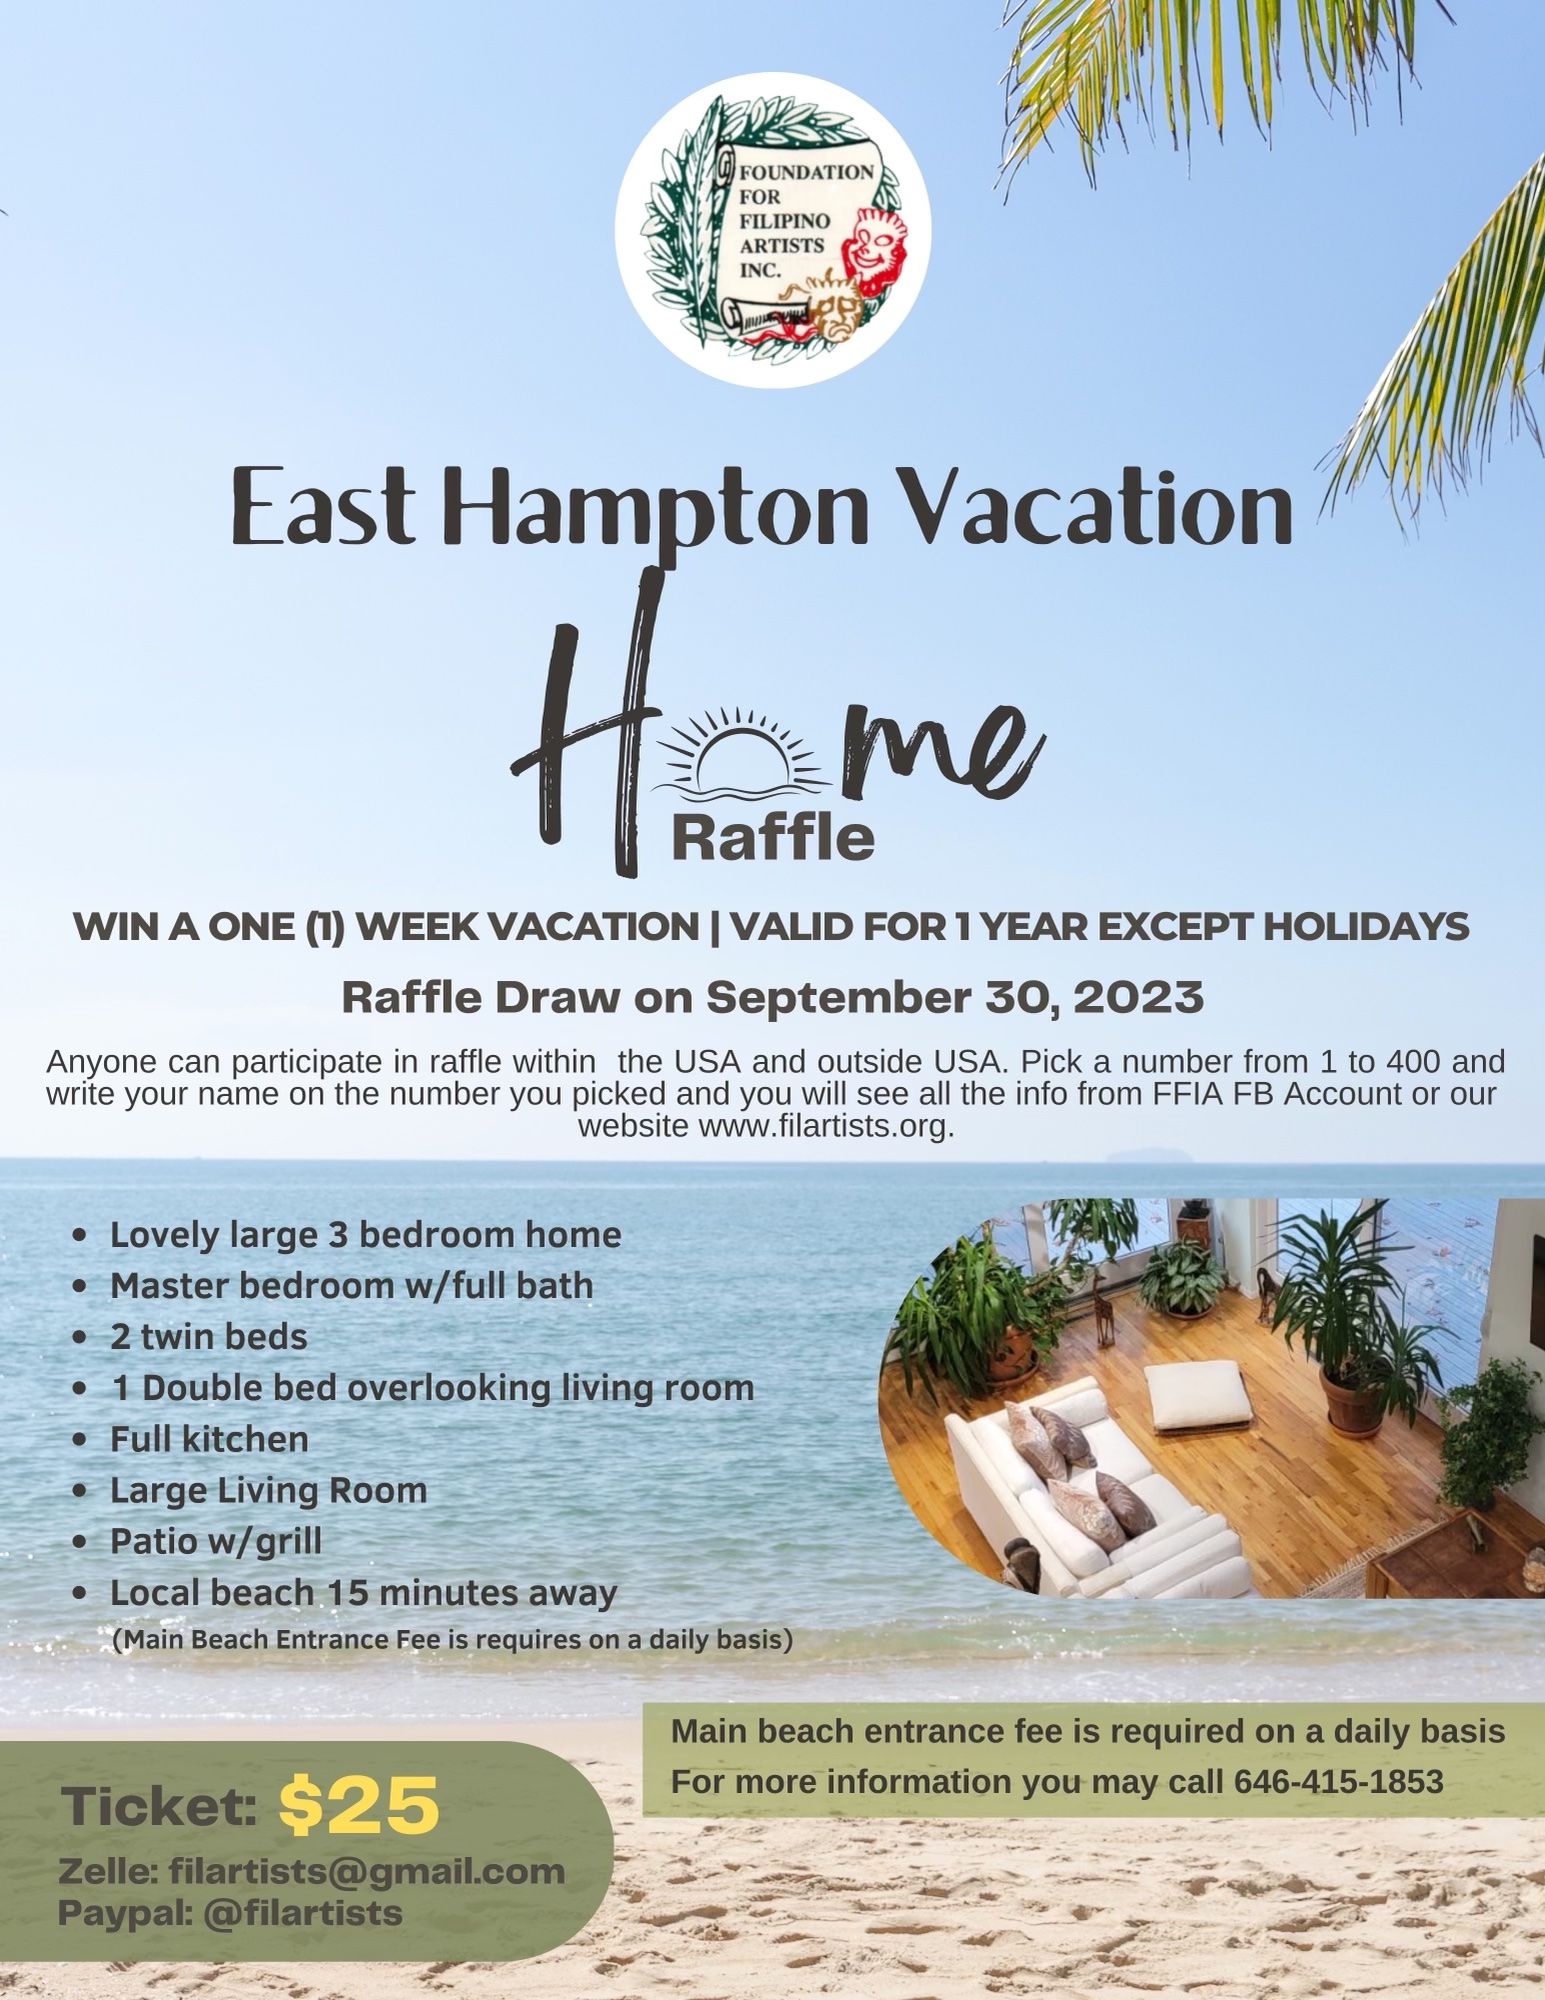 Enter our Raffle for a 1 week East Hampton Vacation 